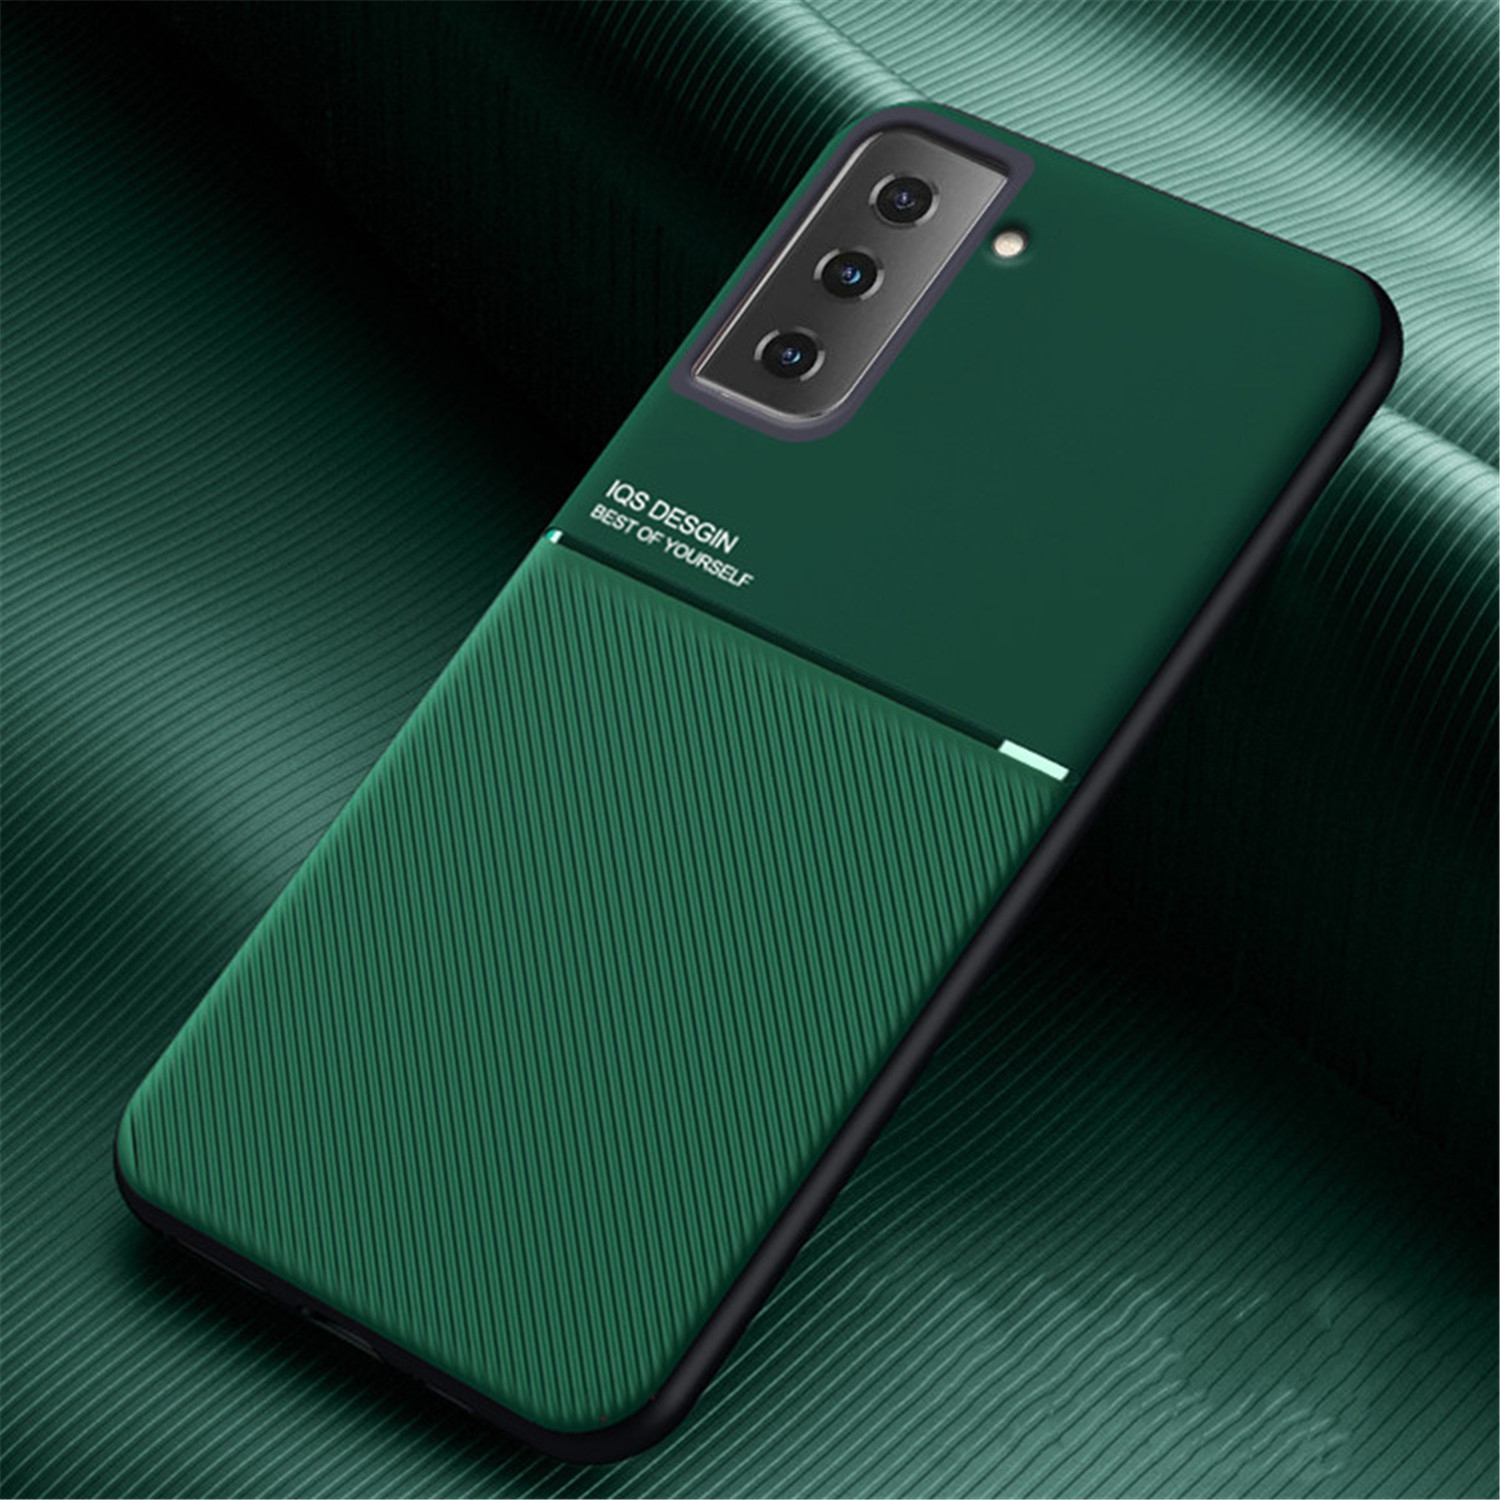 Kelvin Leather Magnetic Texture Slim Matte Back Phone Cove Anti Fall Frosted Stripe Cases For Samsunf Galaxy S21 FE -Green (FREE SHIPPING)